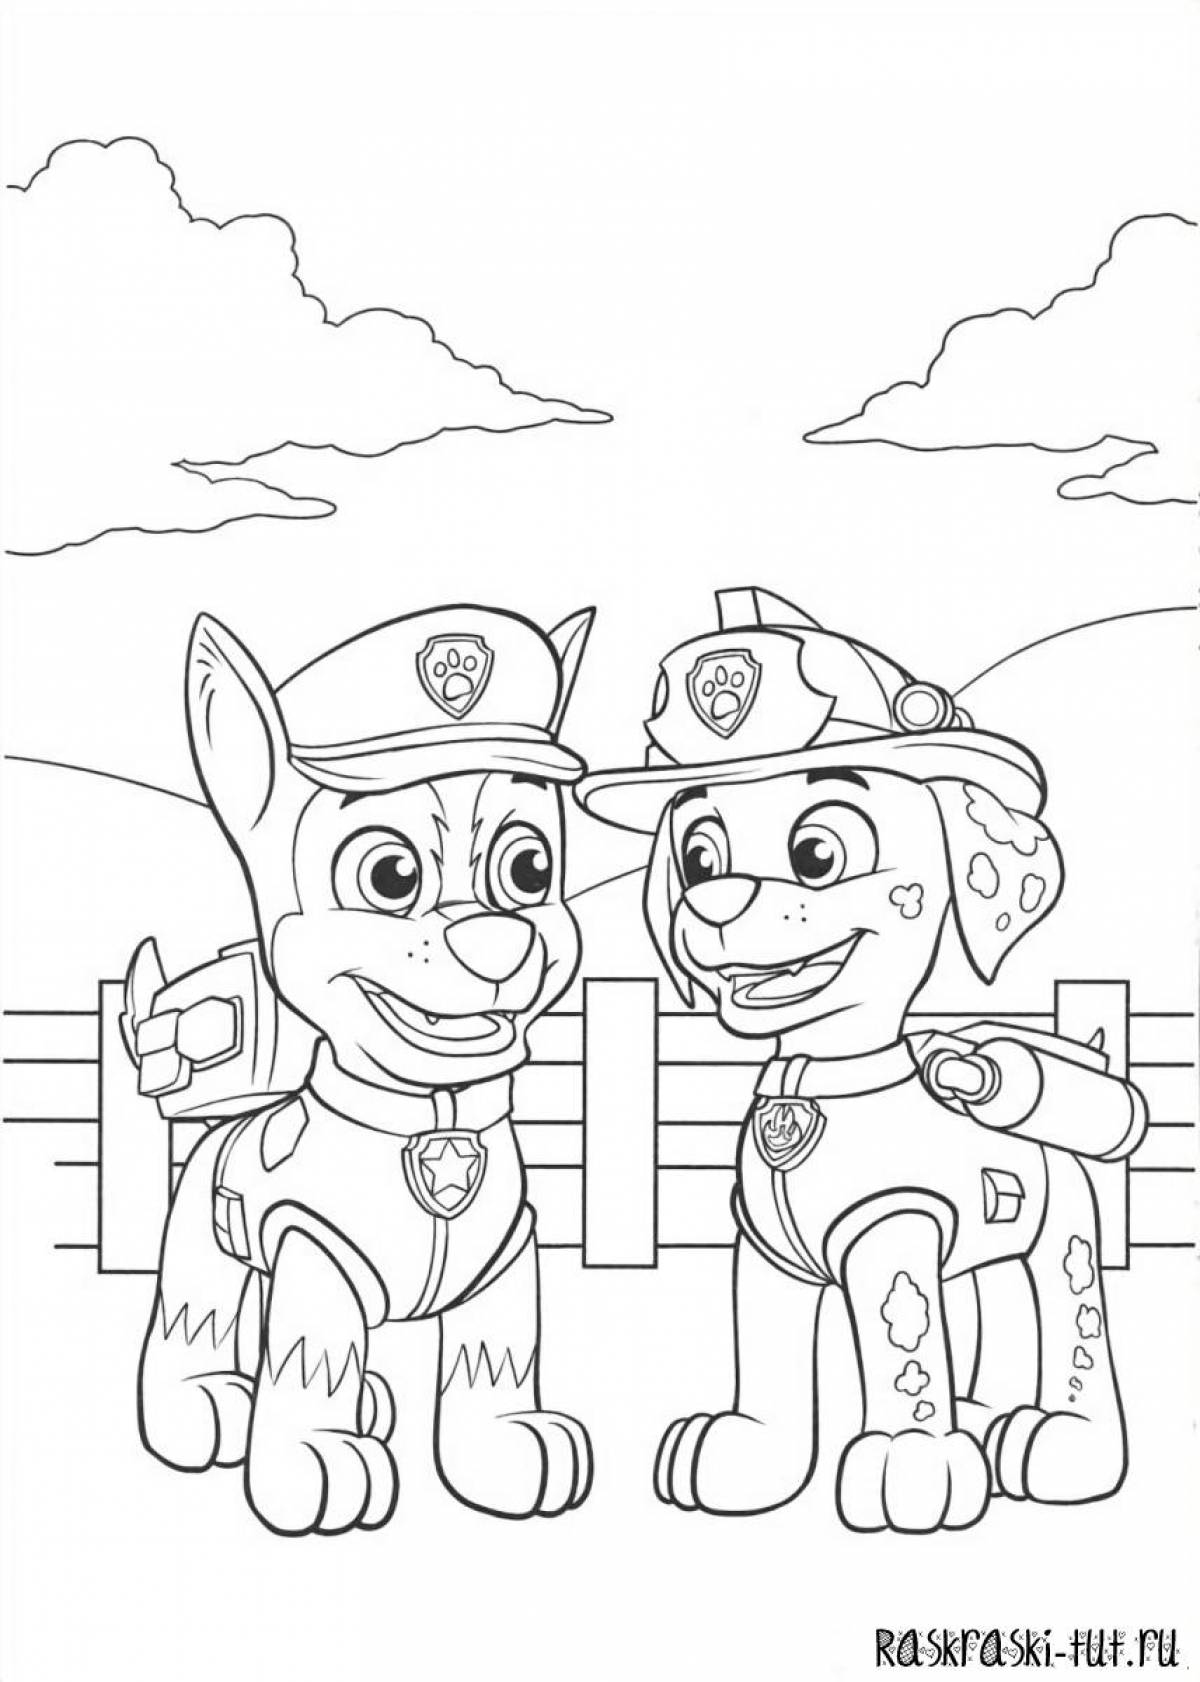 Colourful bright coloring page Paw Patrol Marshal